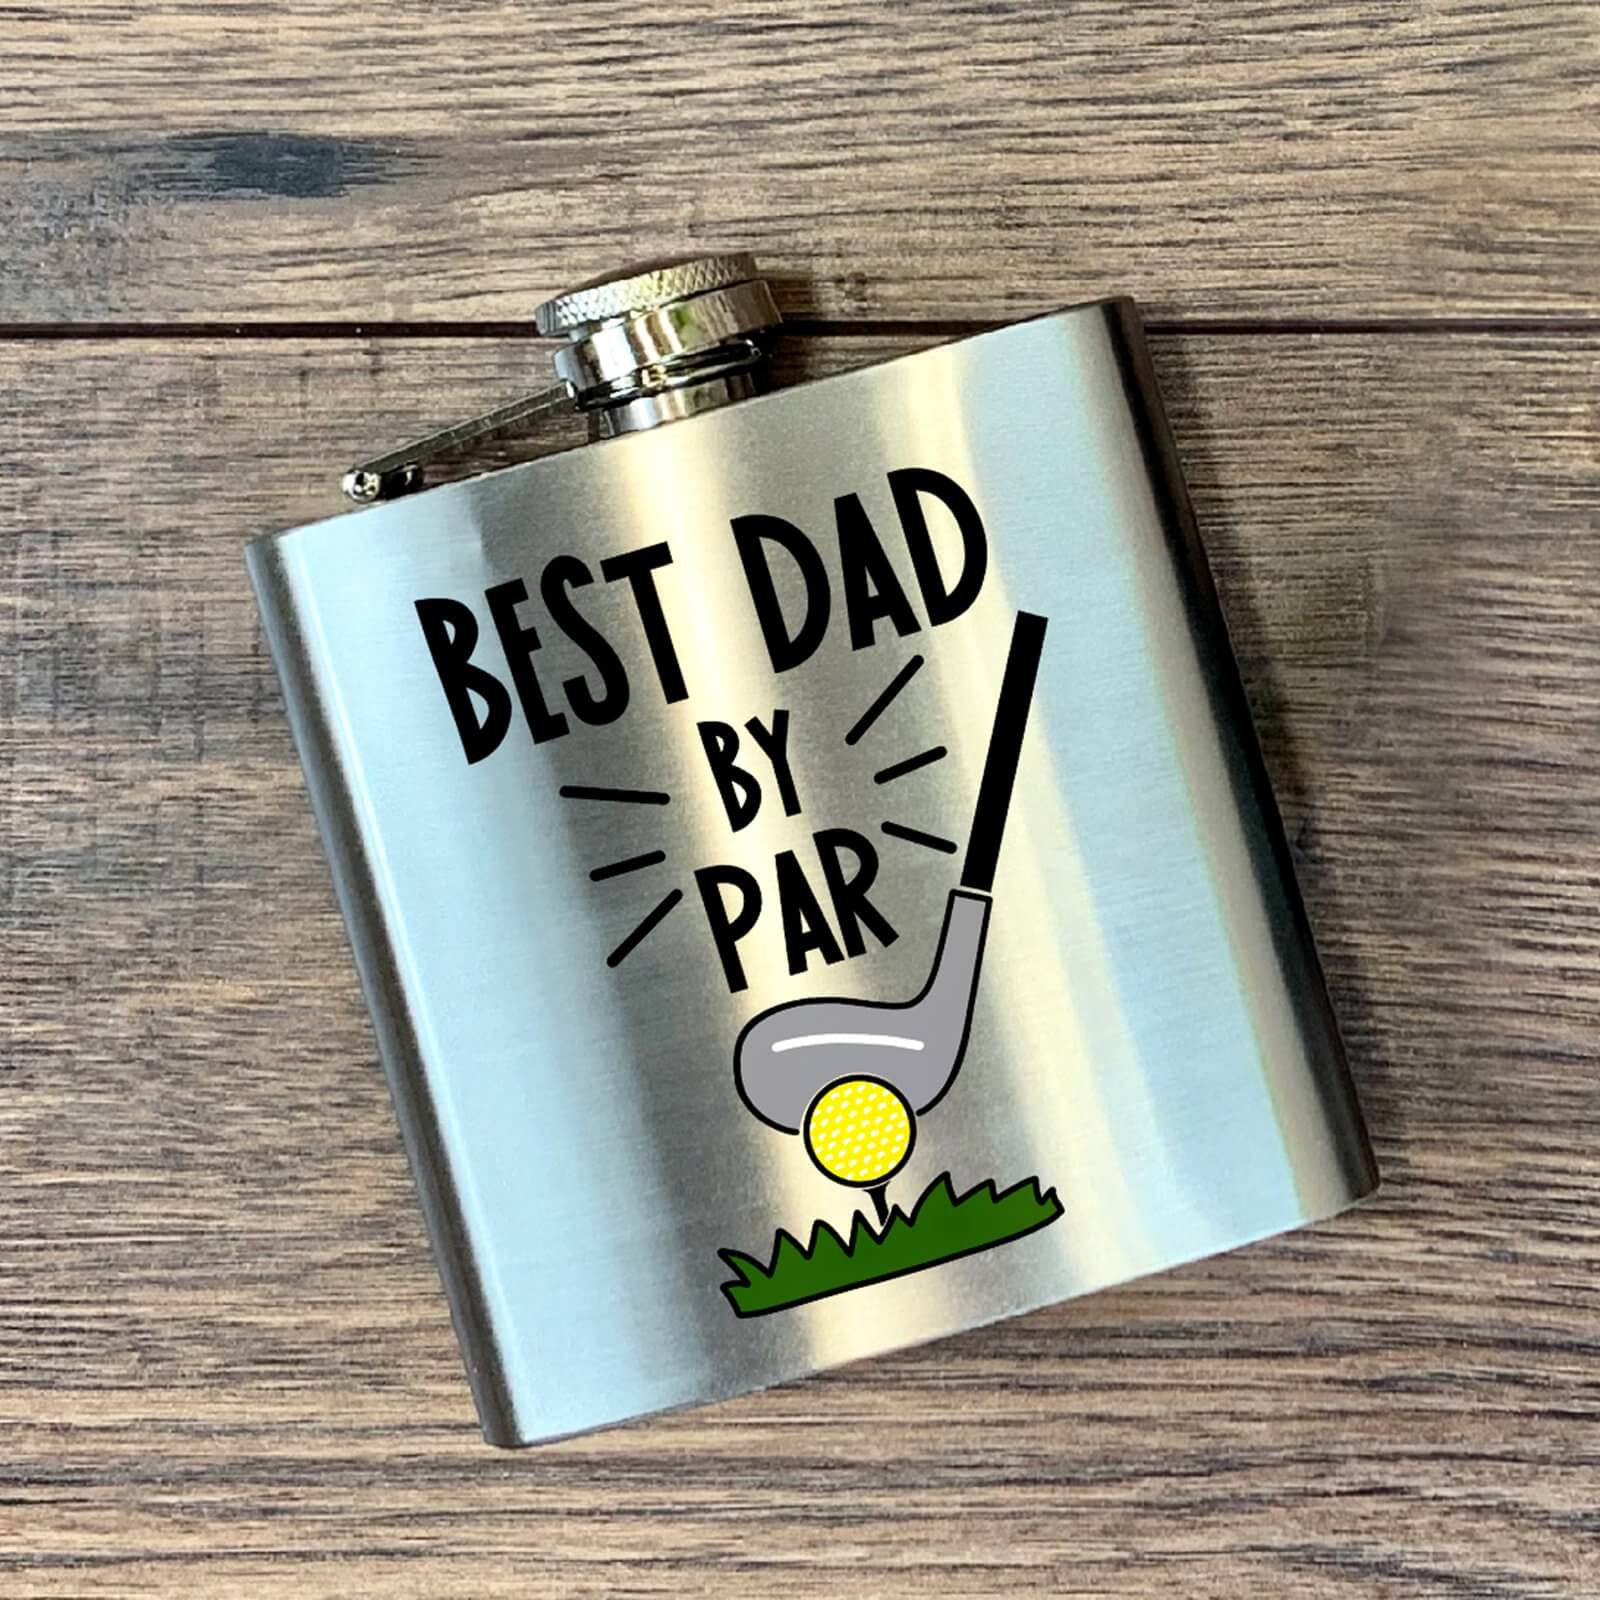 The inscription "The best dad at face value" on a flask for alcohol.